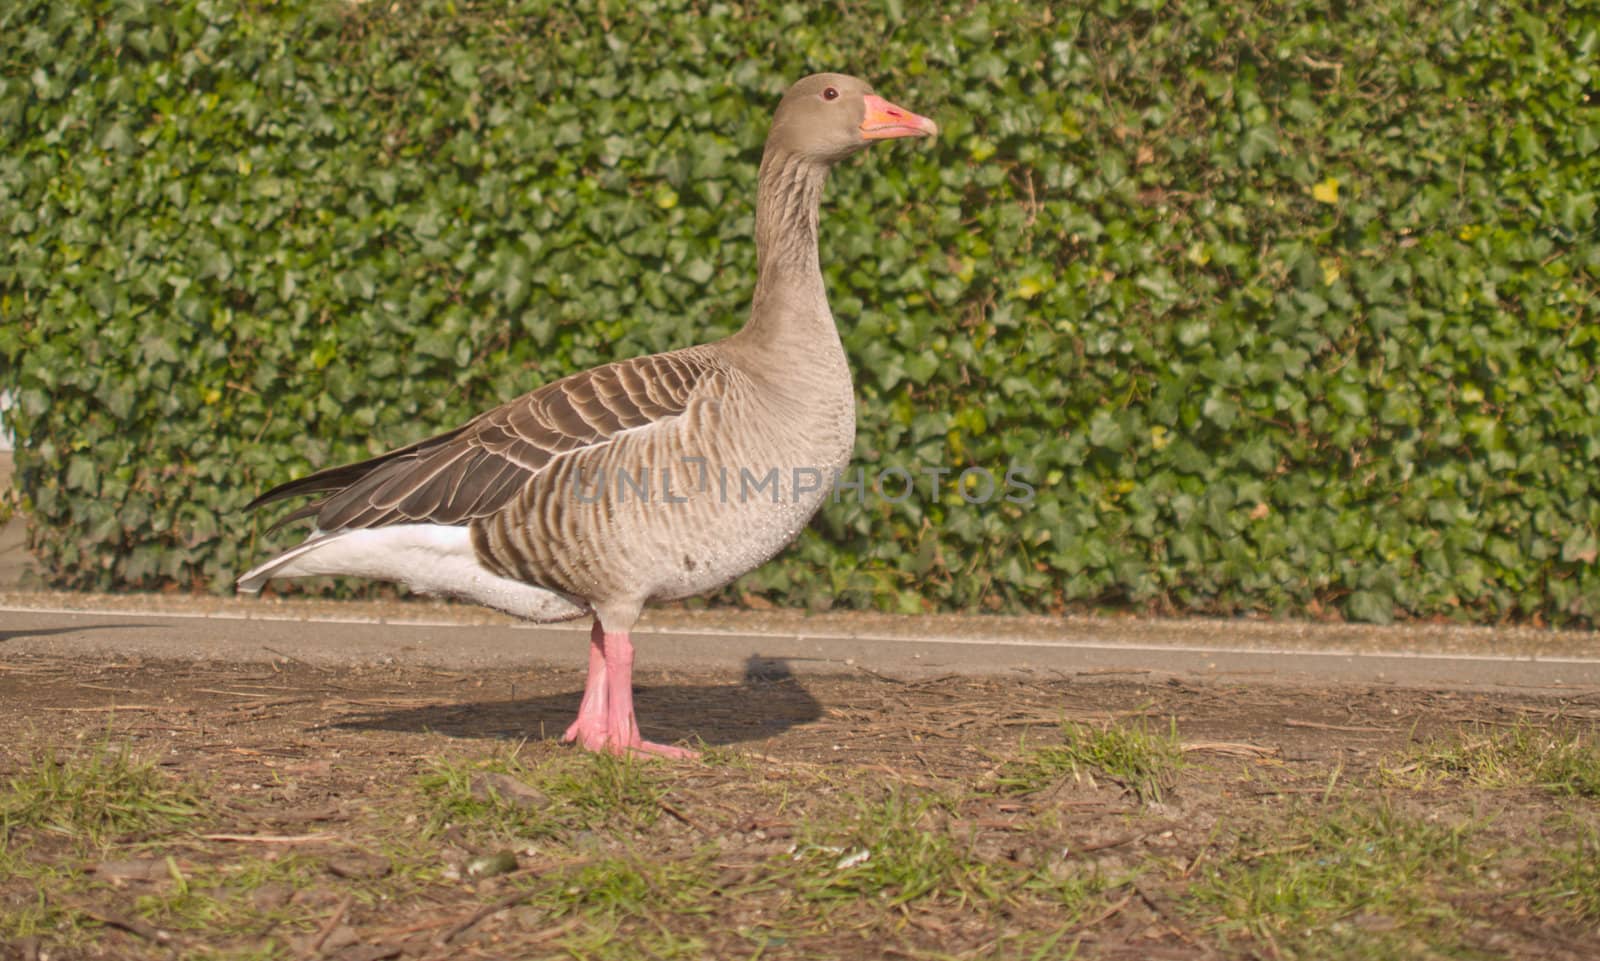 Lone goose standing on grass - copy space